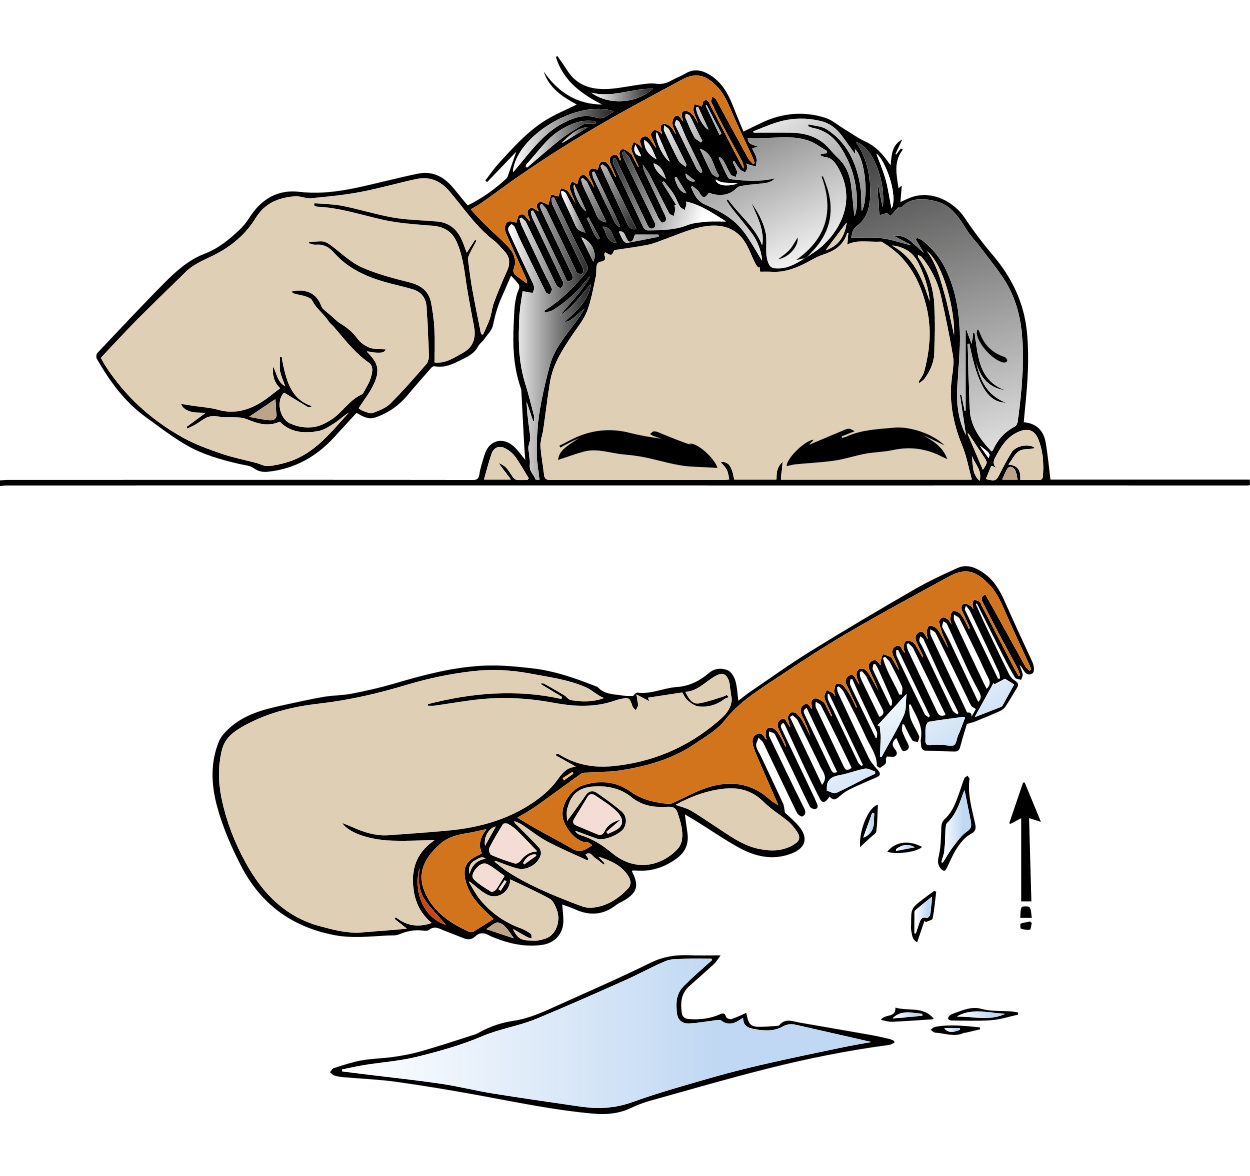 A man manage his hair with a plastic comb then sheets of paper are attracted by the plastic comb